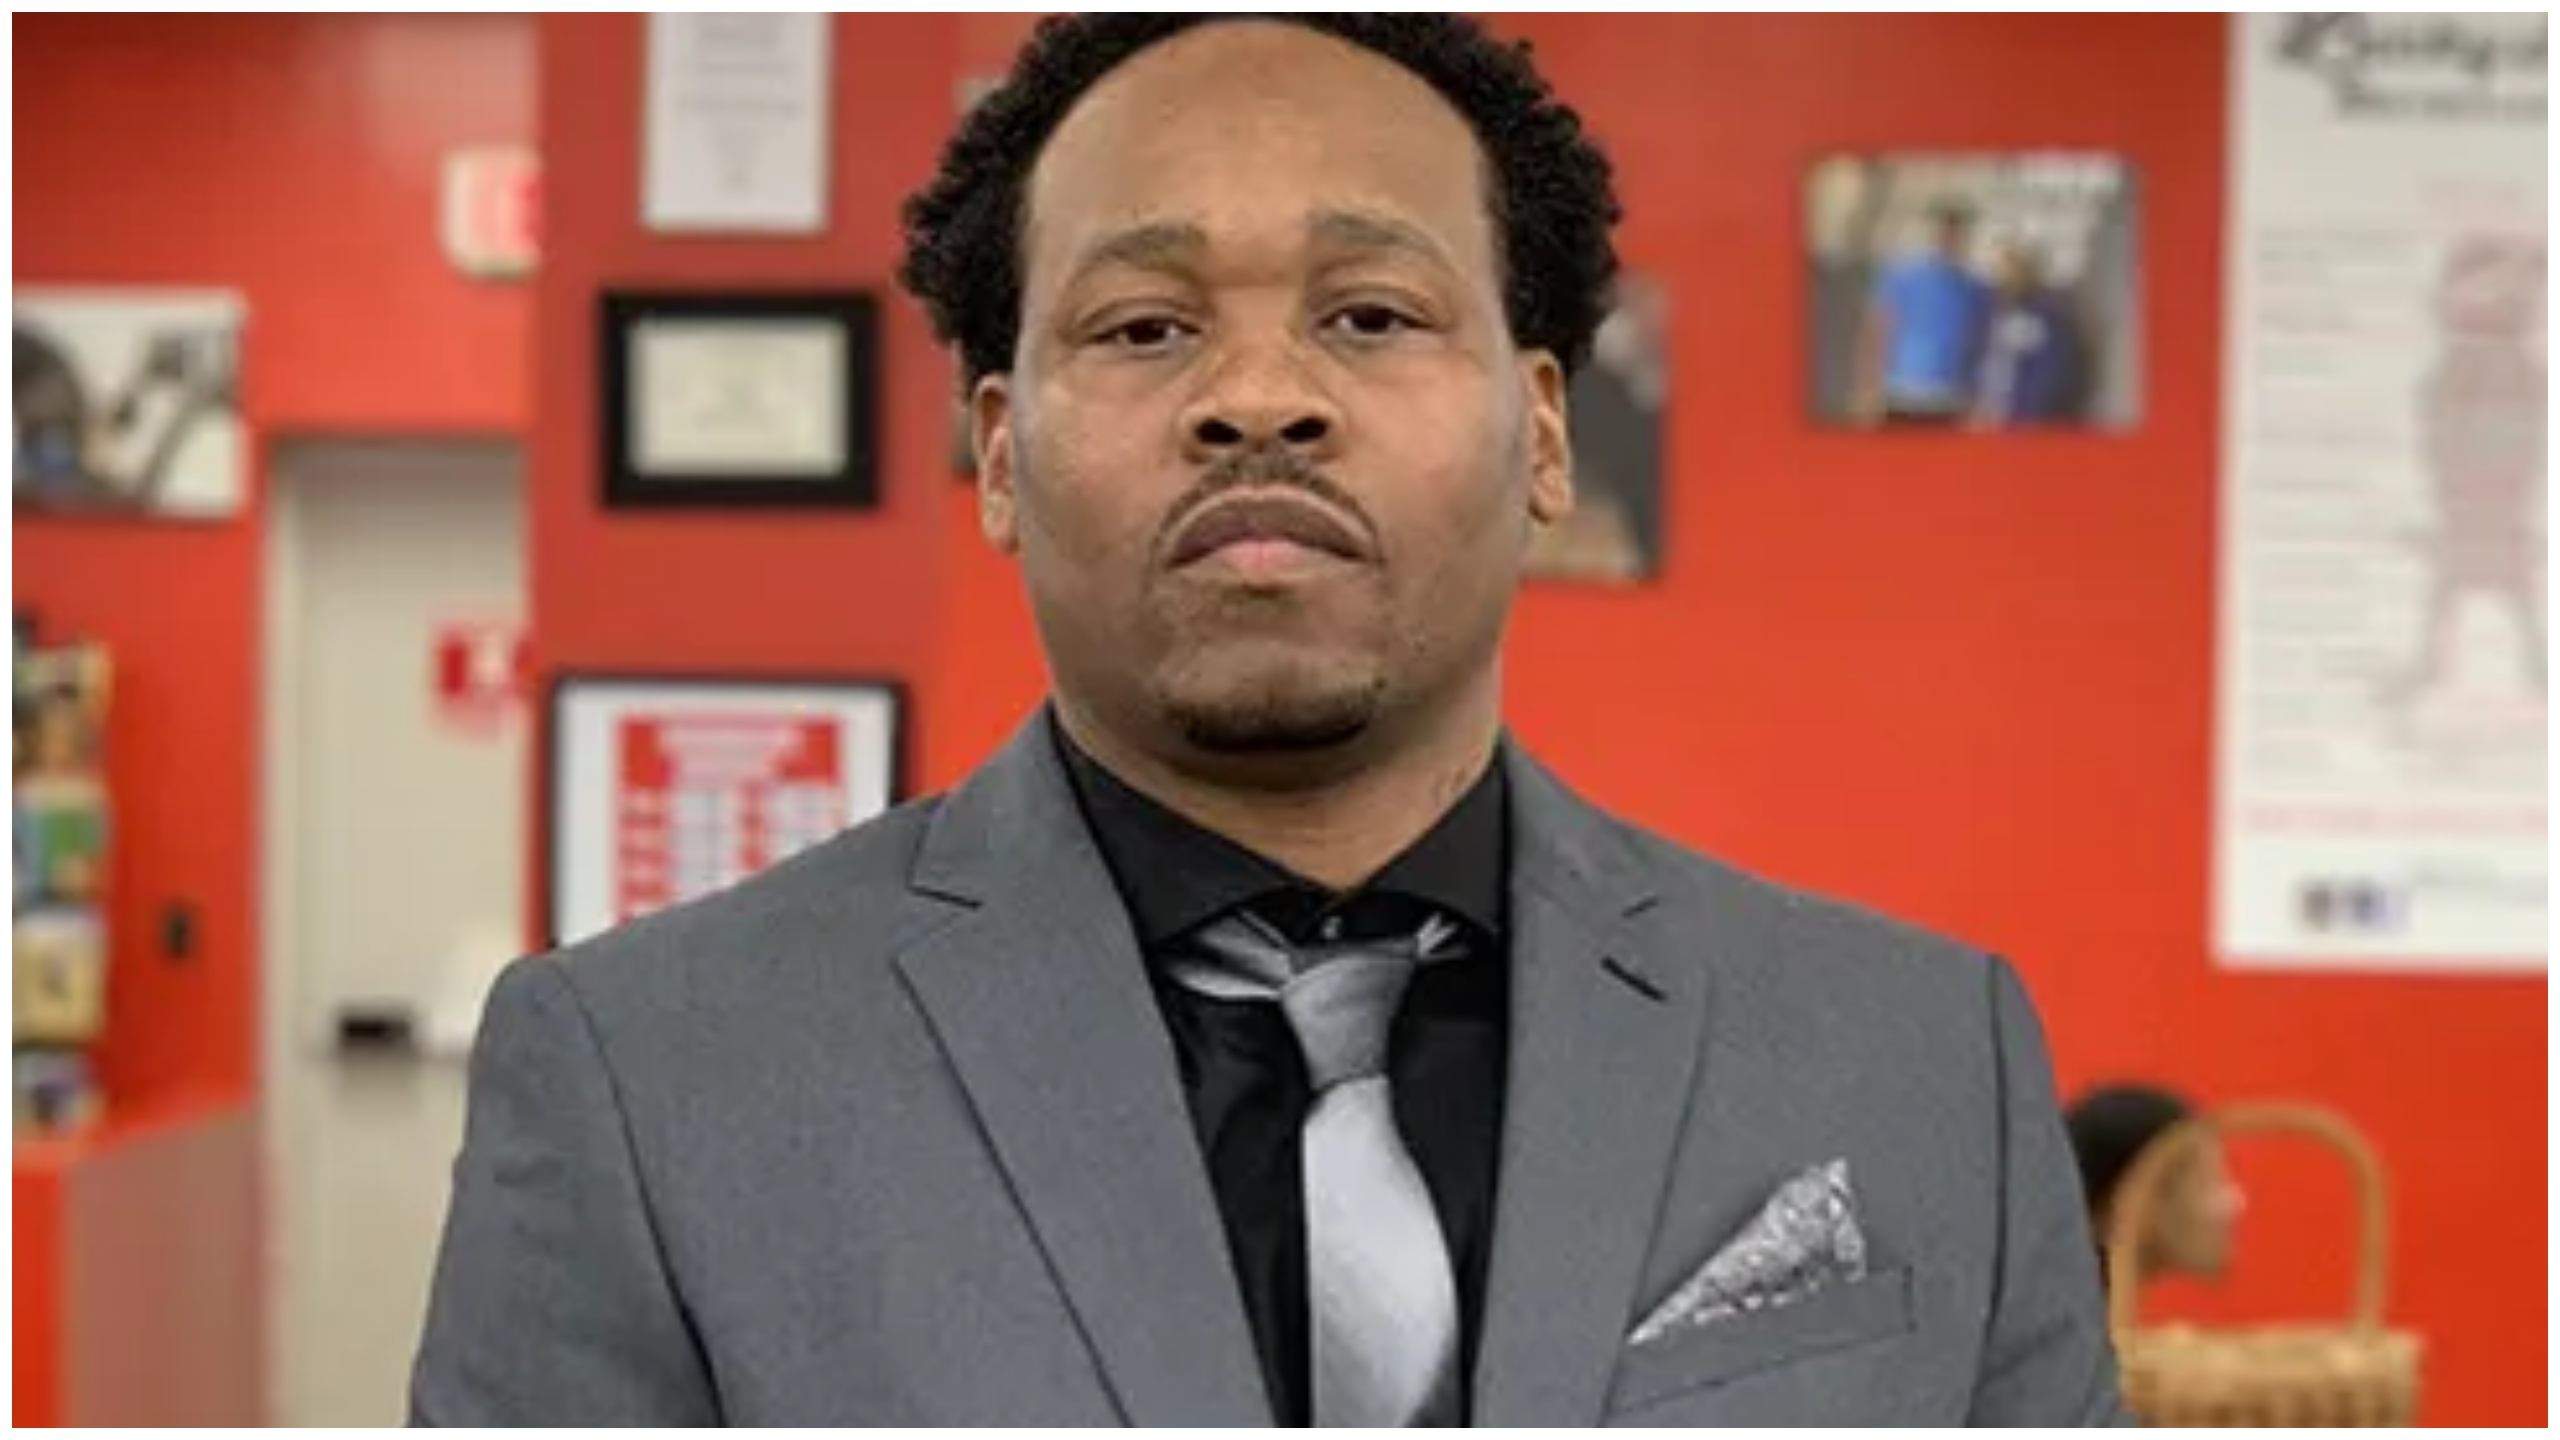 Shaun Corbett Becomes The First Black Person To Own 3 Barbershops Inside Walmart Stores